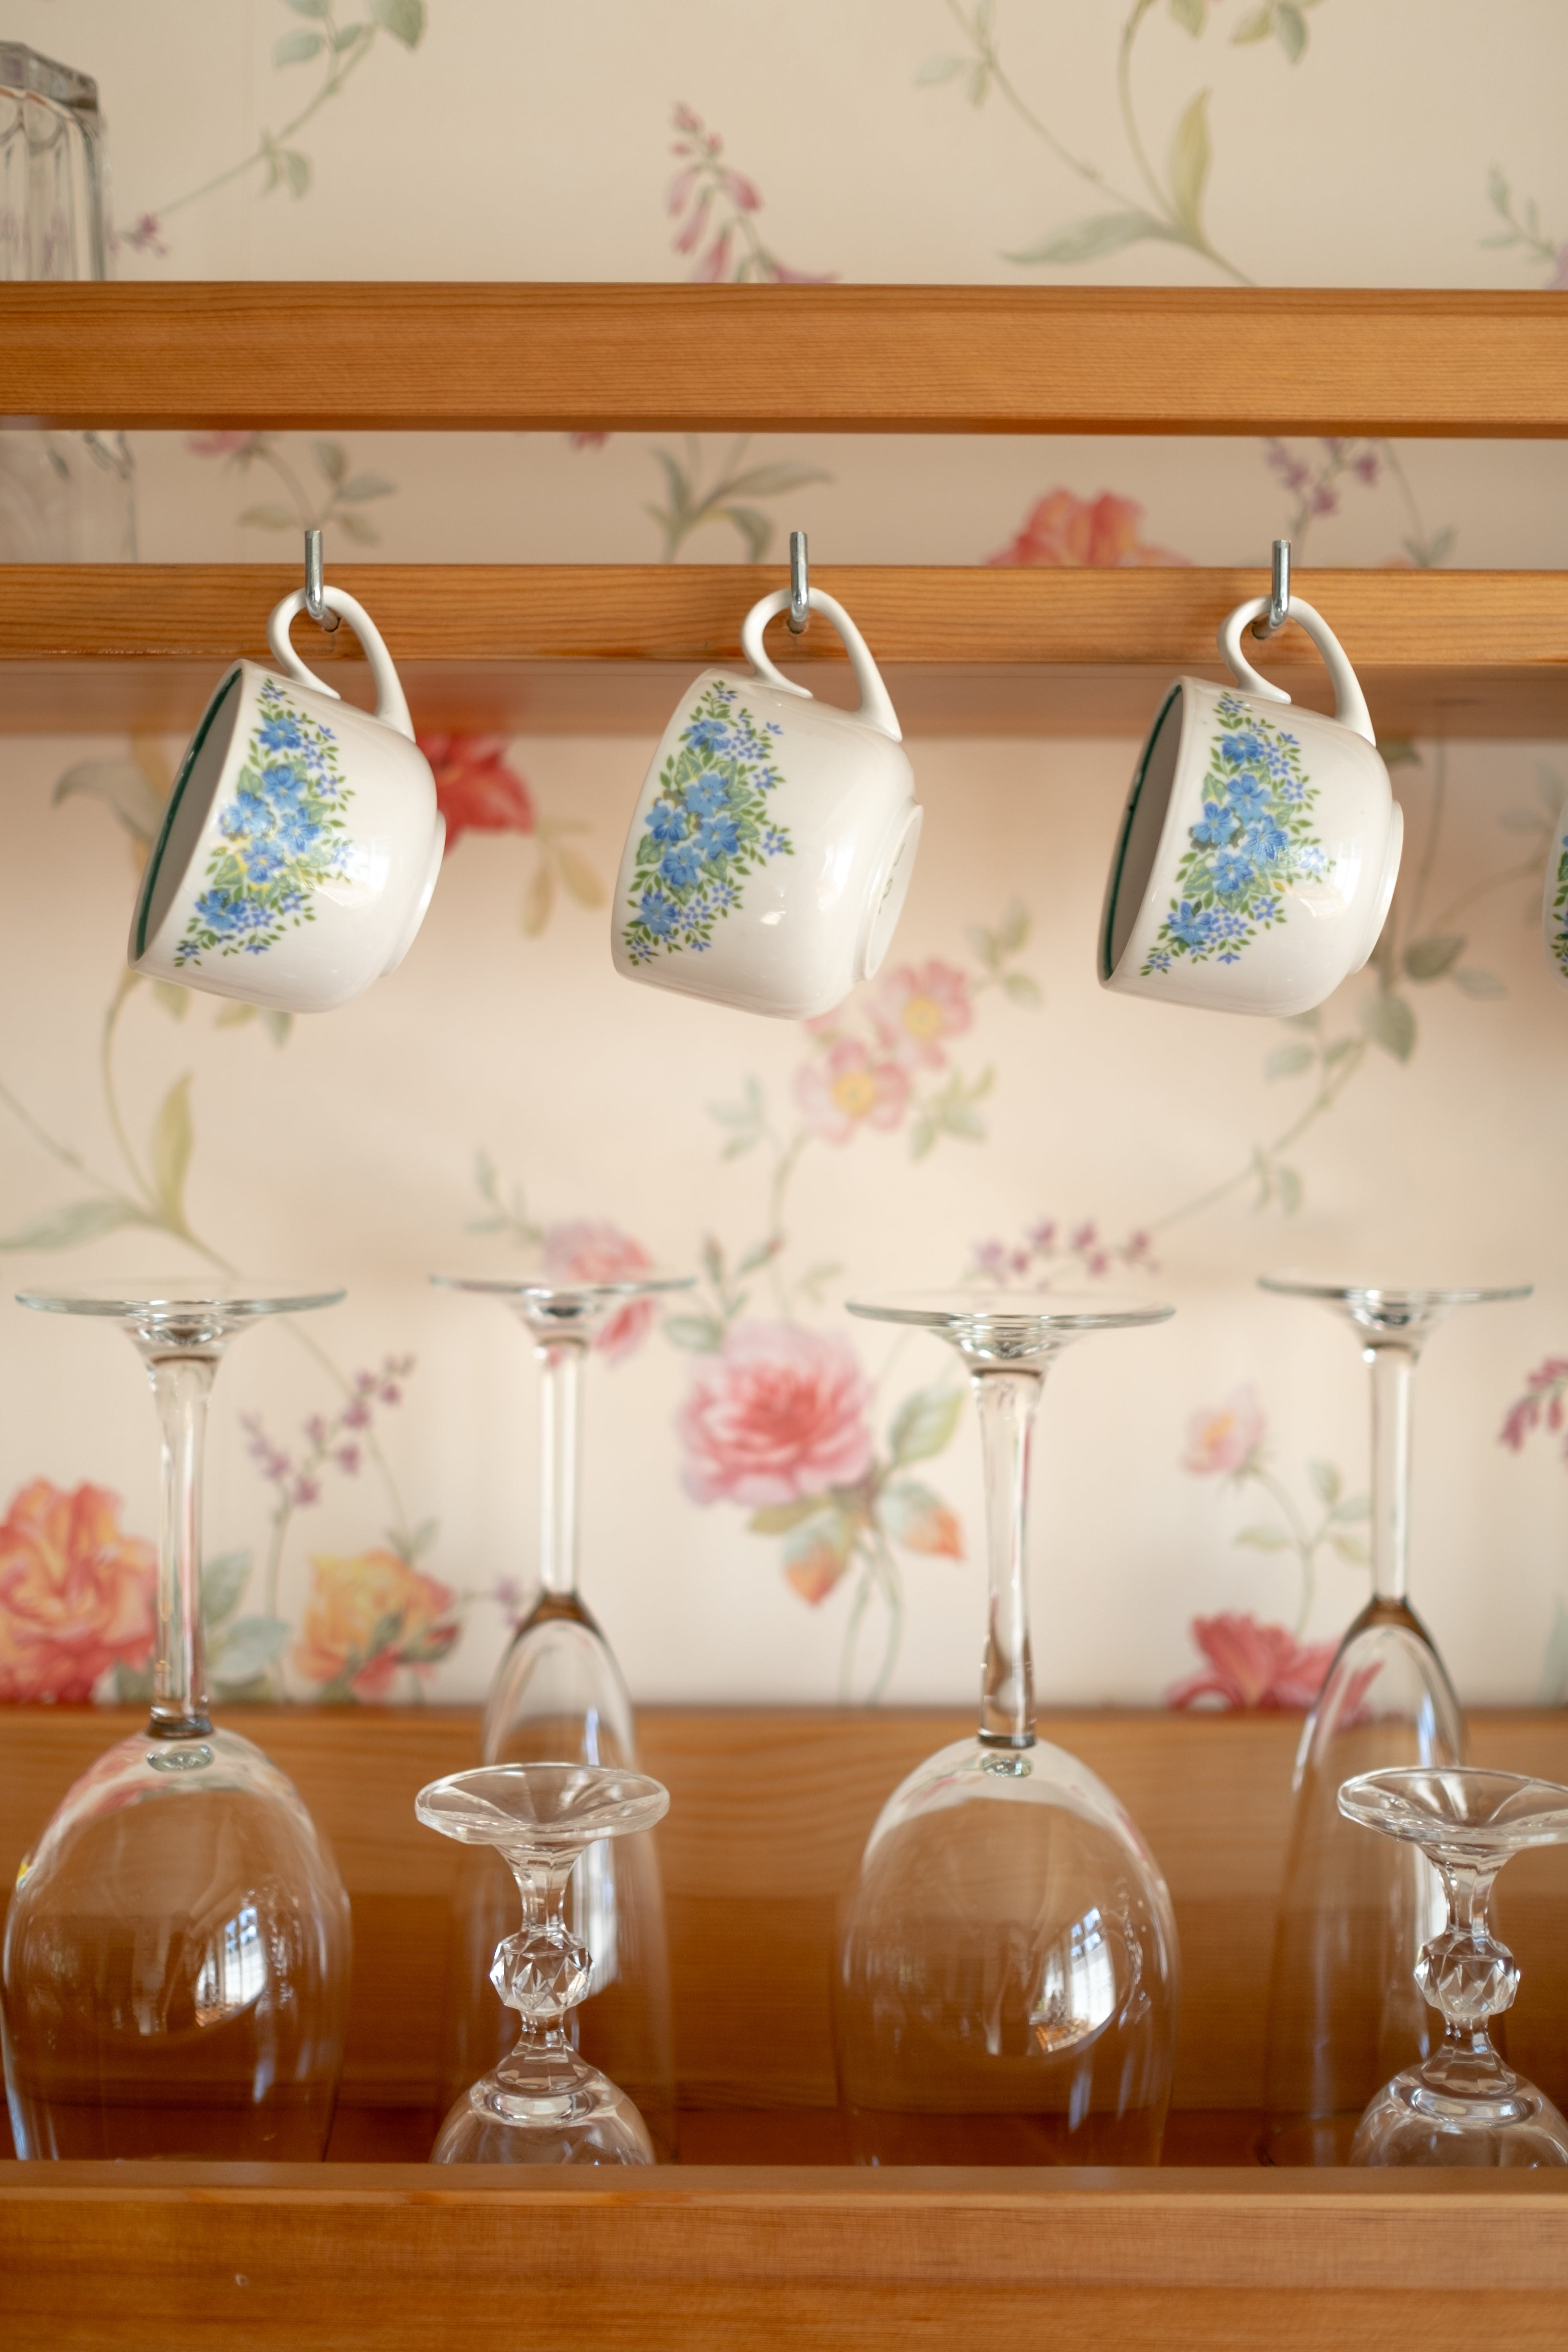 An old fashioned kitchen with flower wallpaper and glasses.